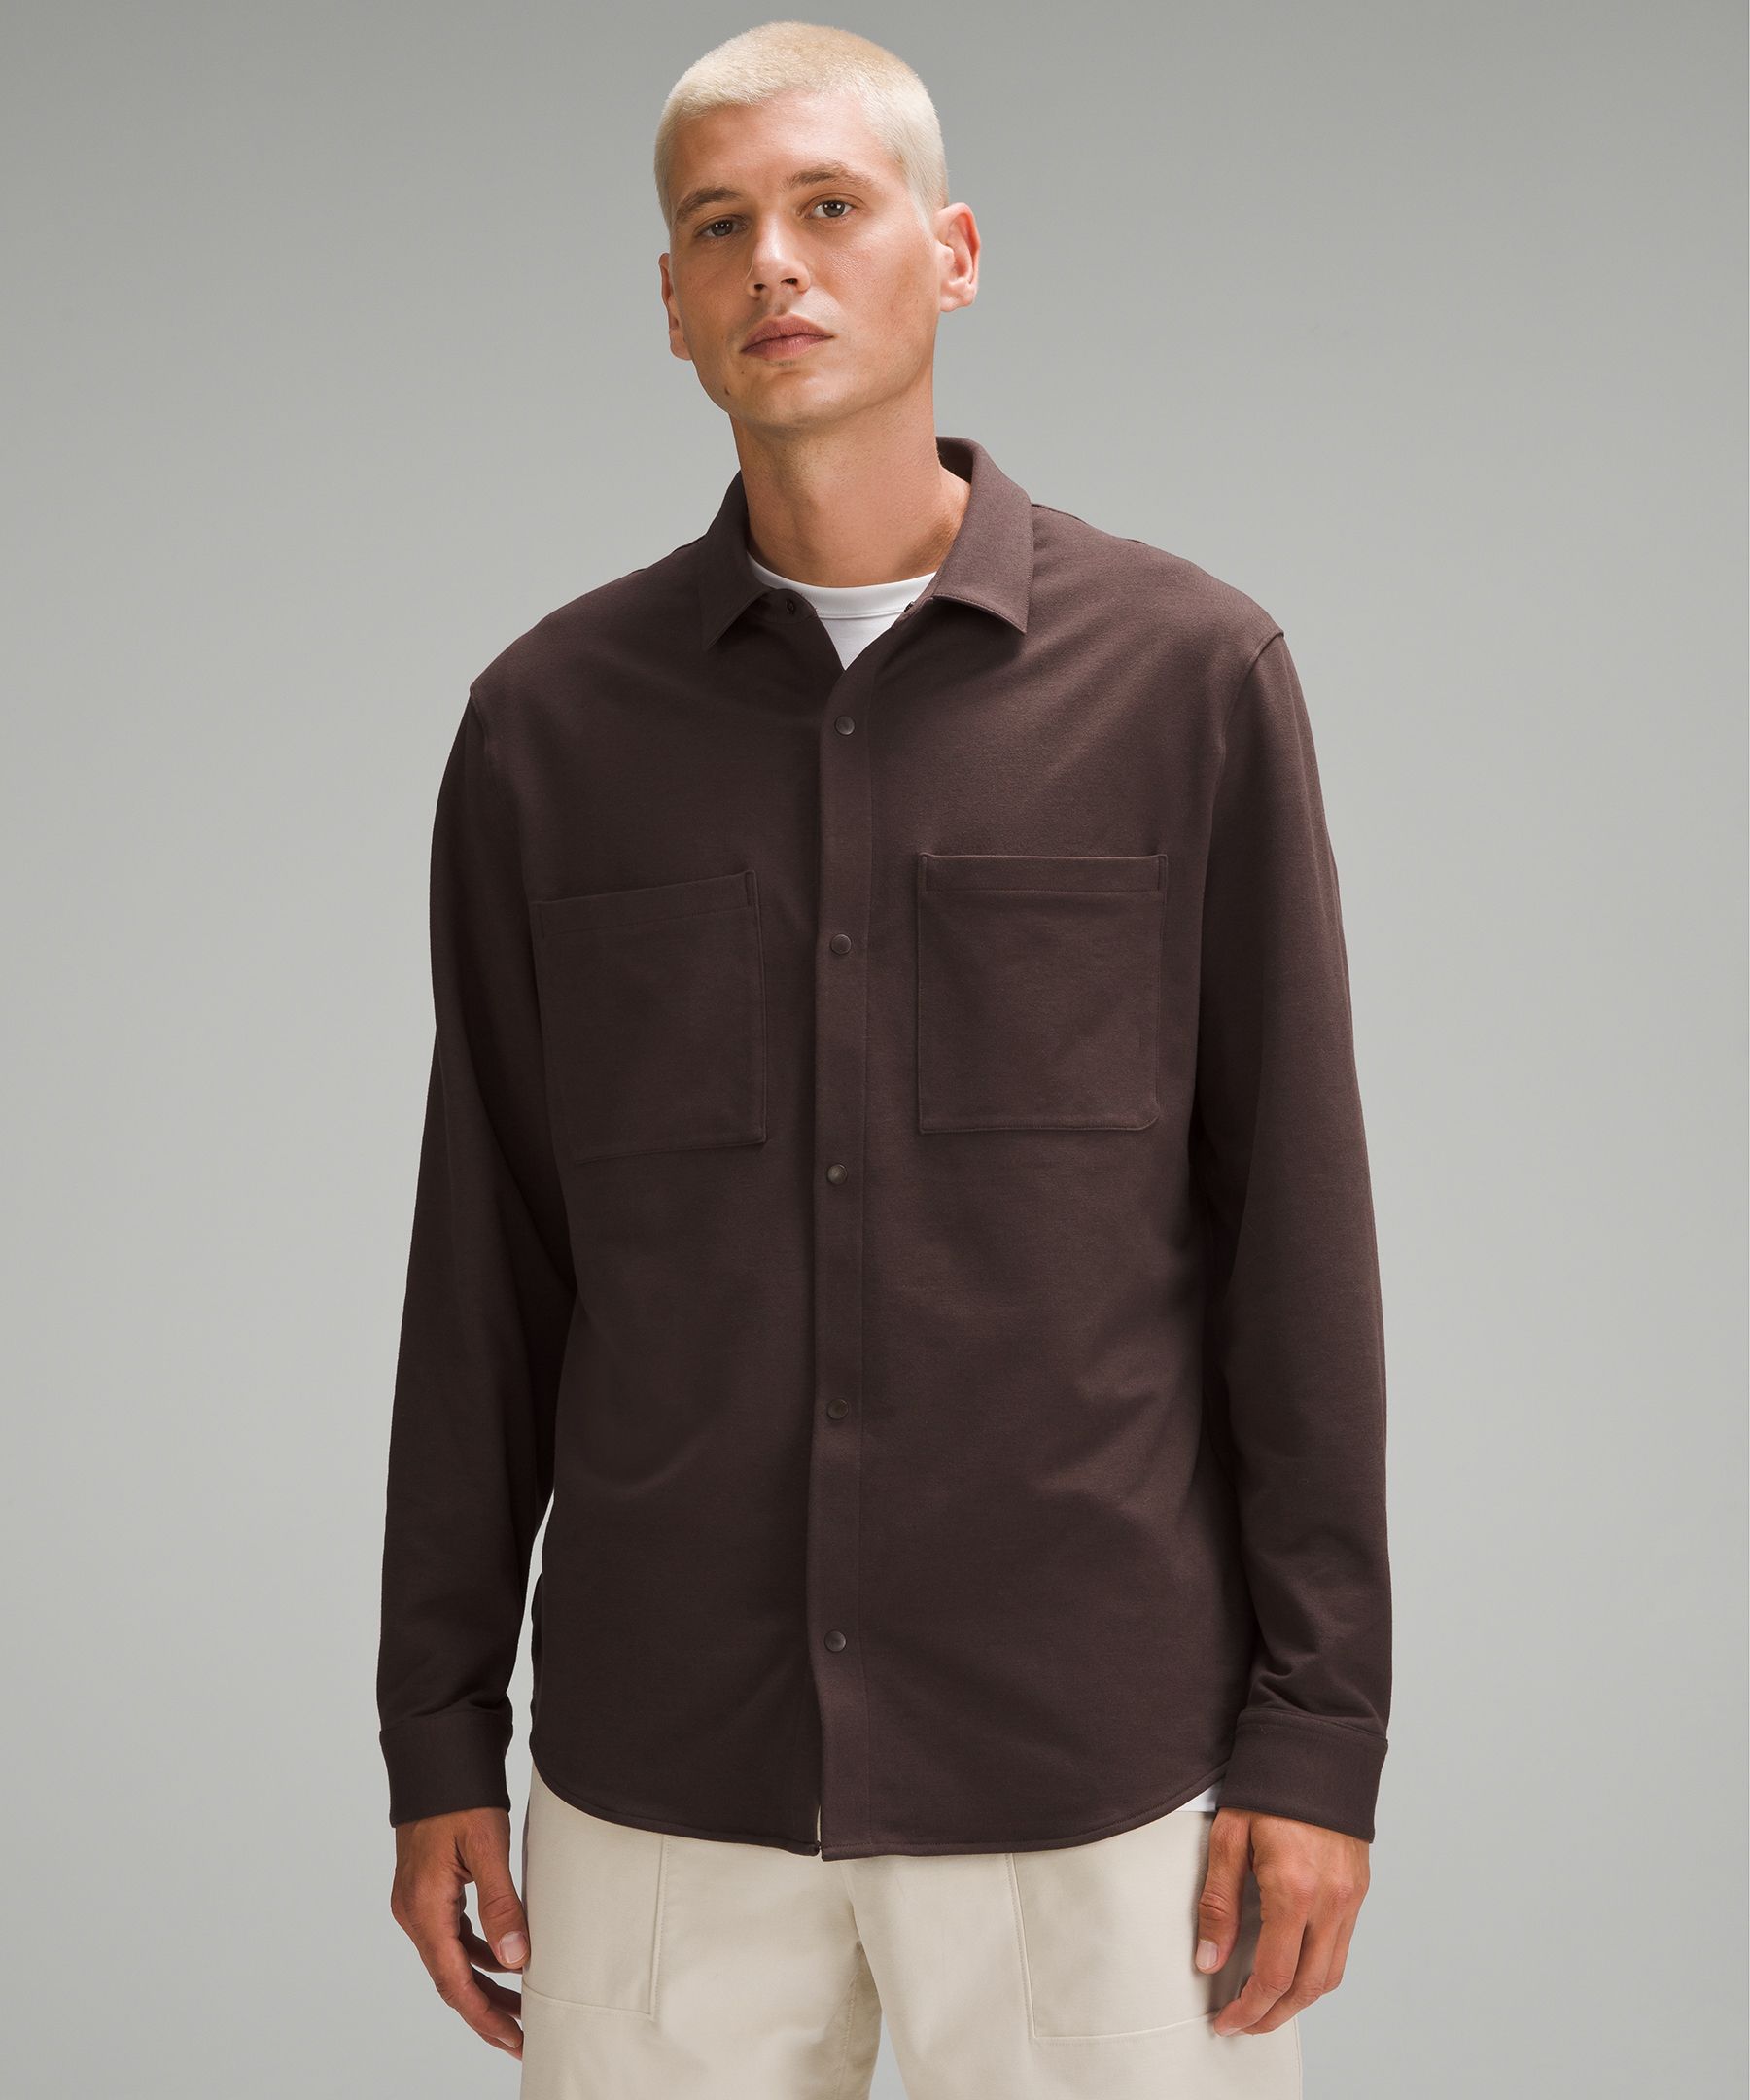 Soft Knit Overshirt *French Terry